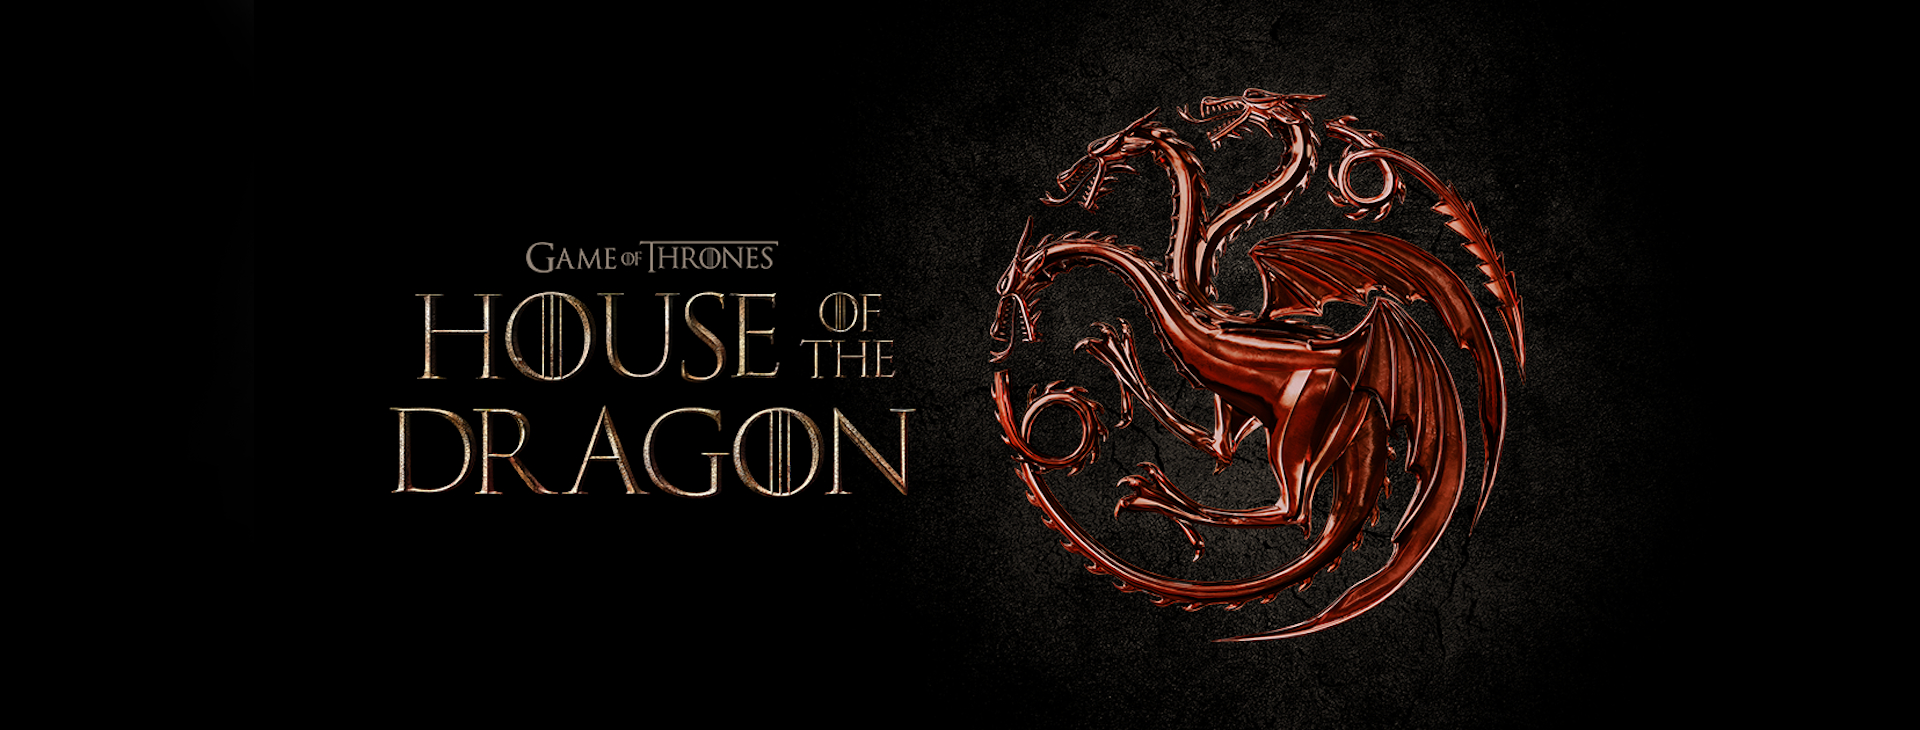 official-photos-for-house-of-the-dragon-officially-unveiled-coming-to-hbo-go-on-2022-trendgrnd